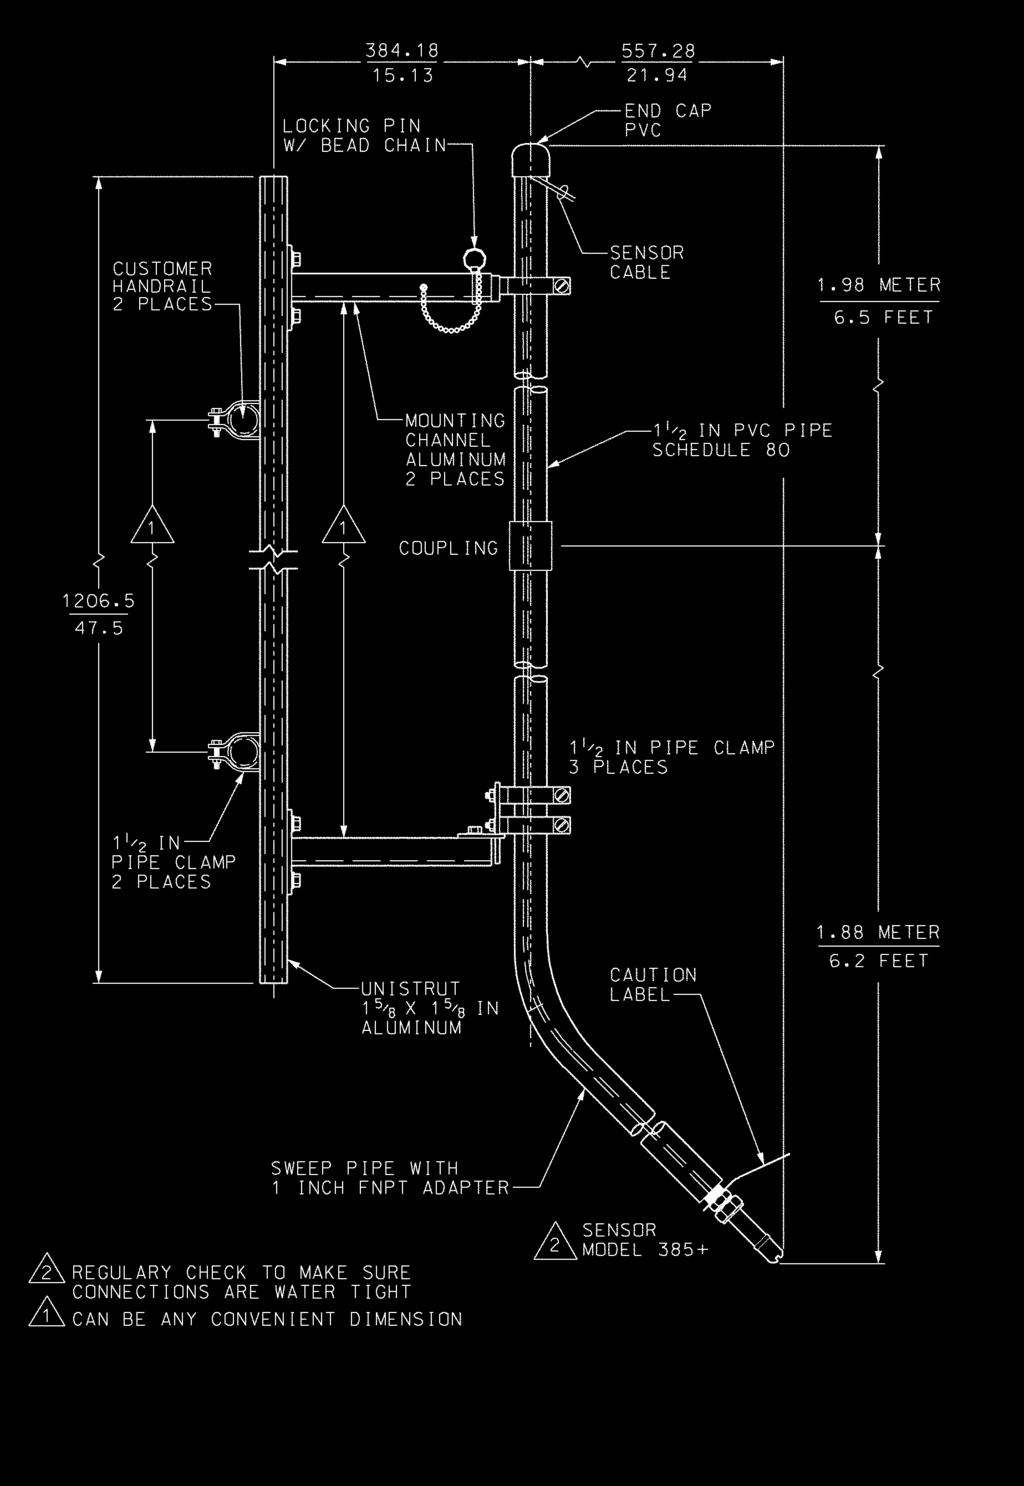 reference wire before connecting wire to terminal. DWG. NO. REV. 400385+05 B FIGURE 2-5.